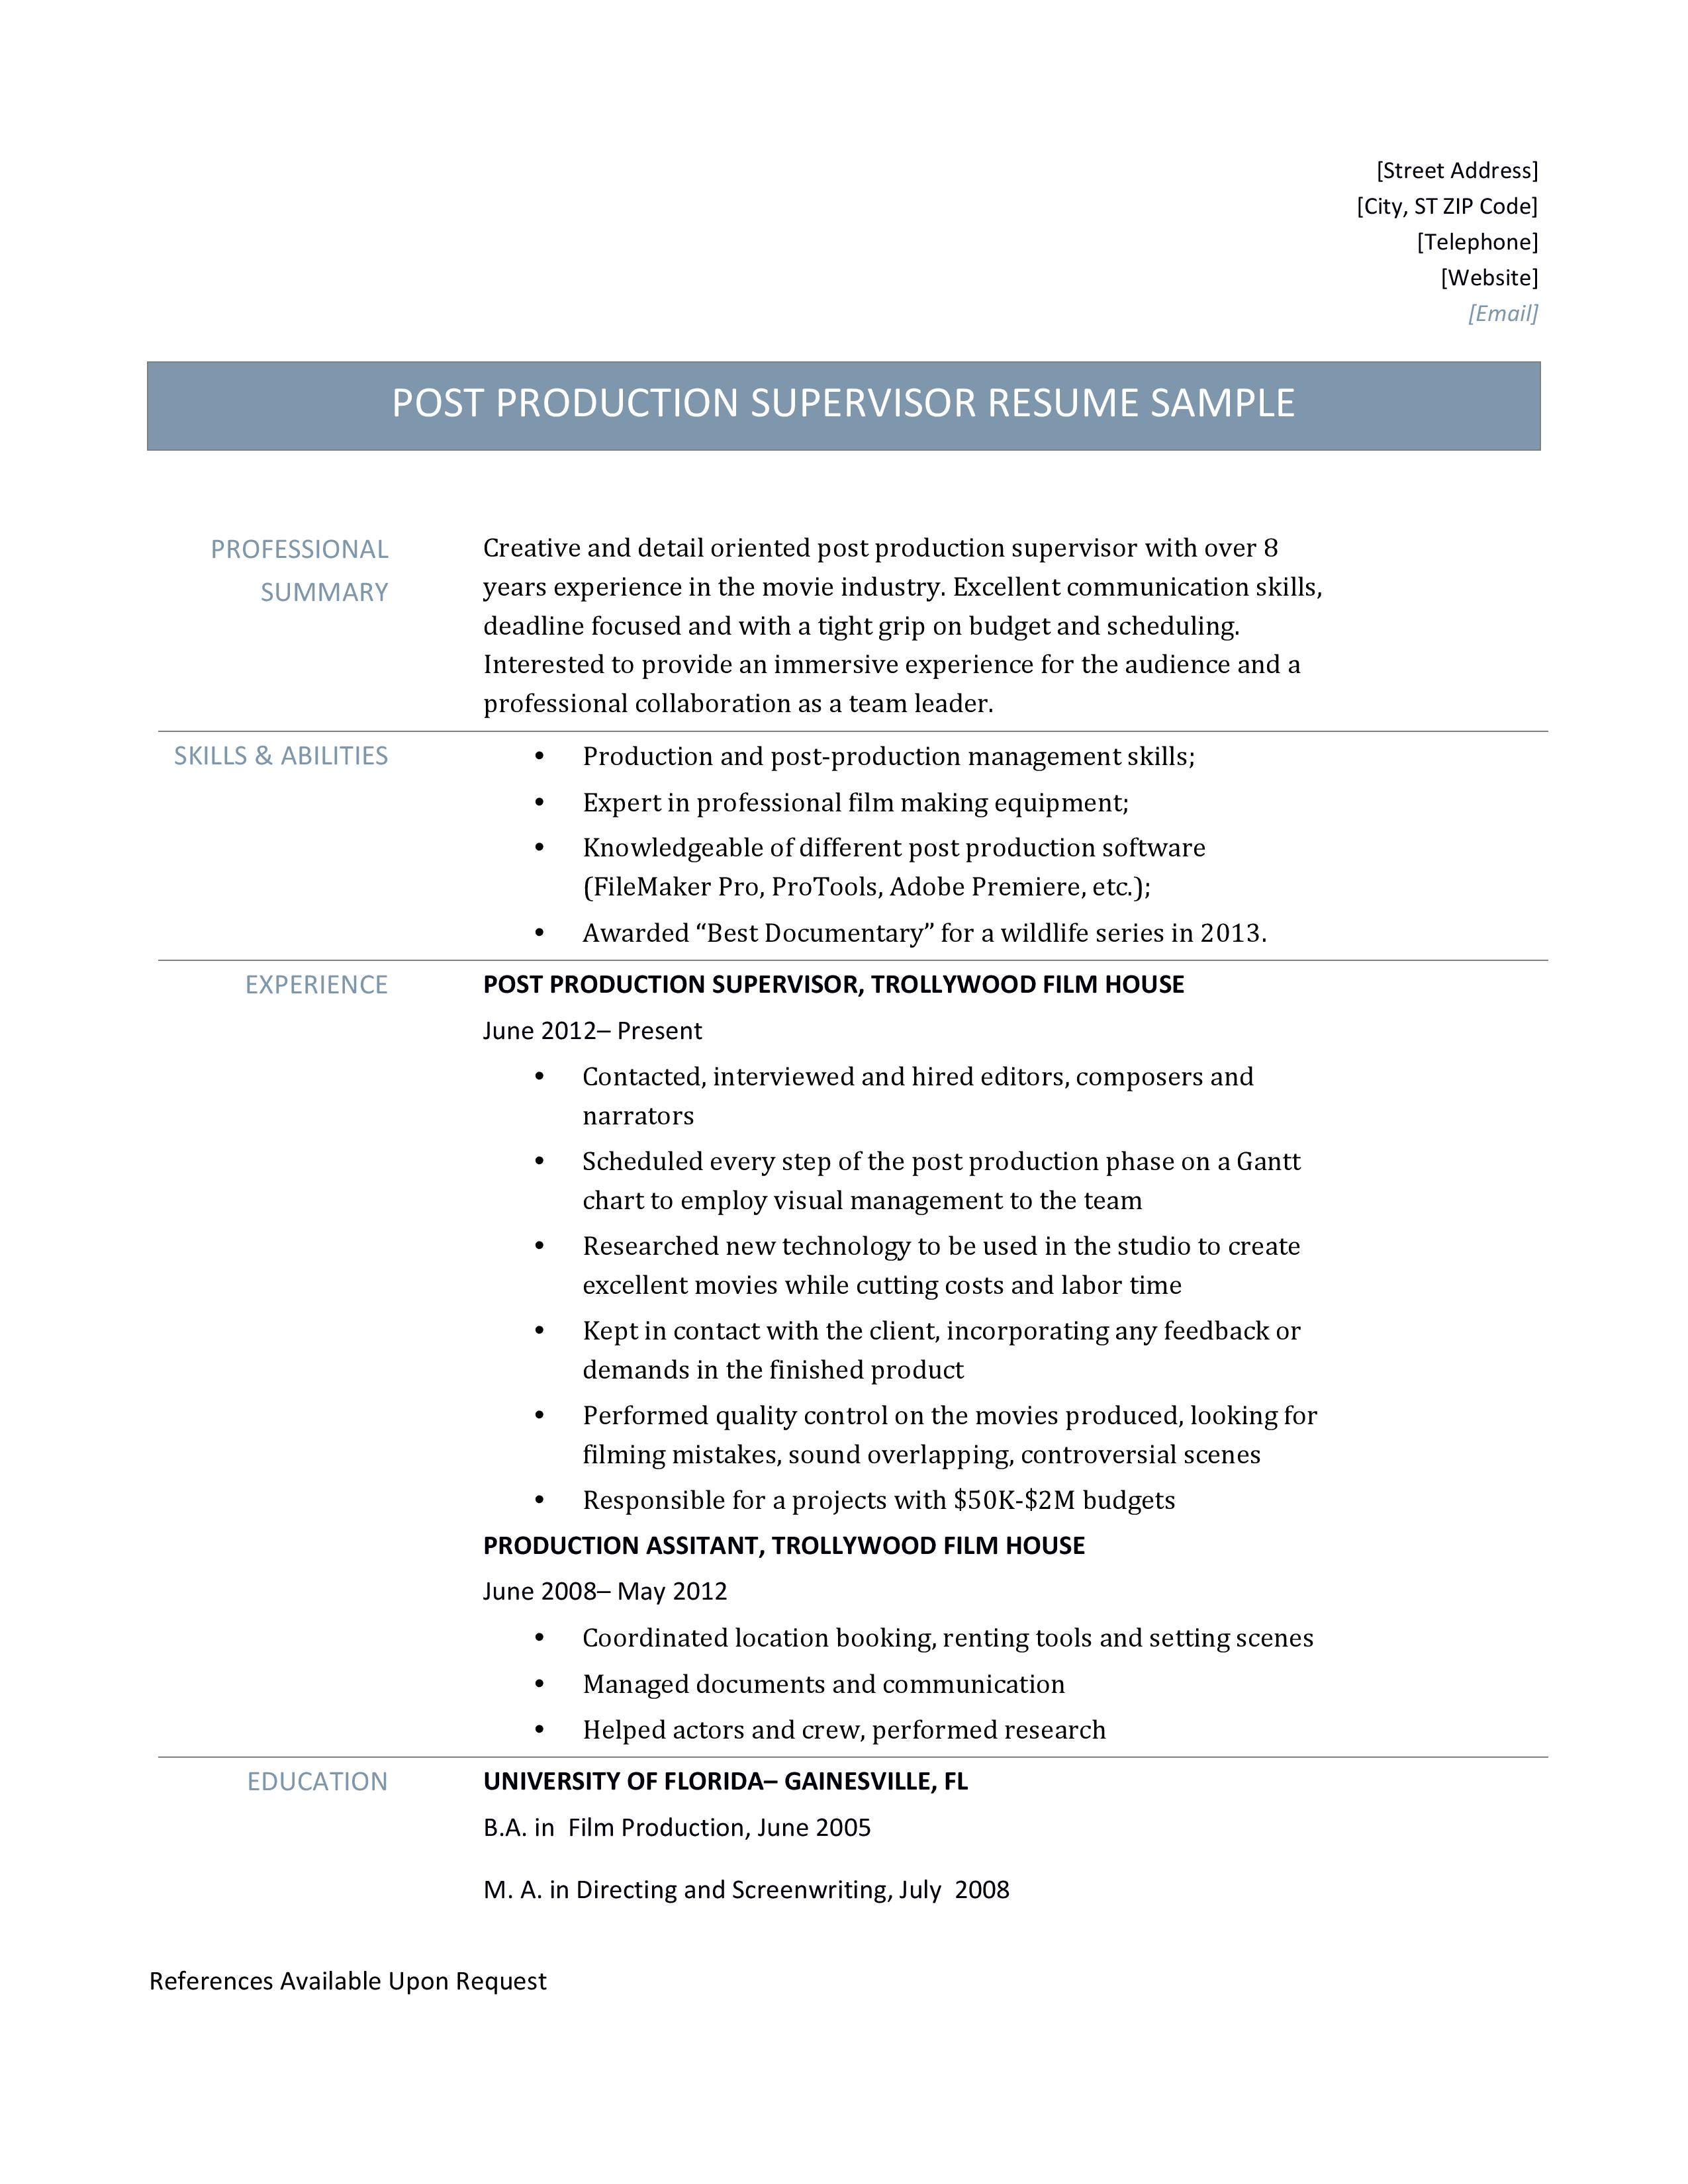 production-supervisor-resume-template-classles-democracy